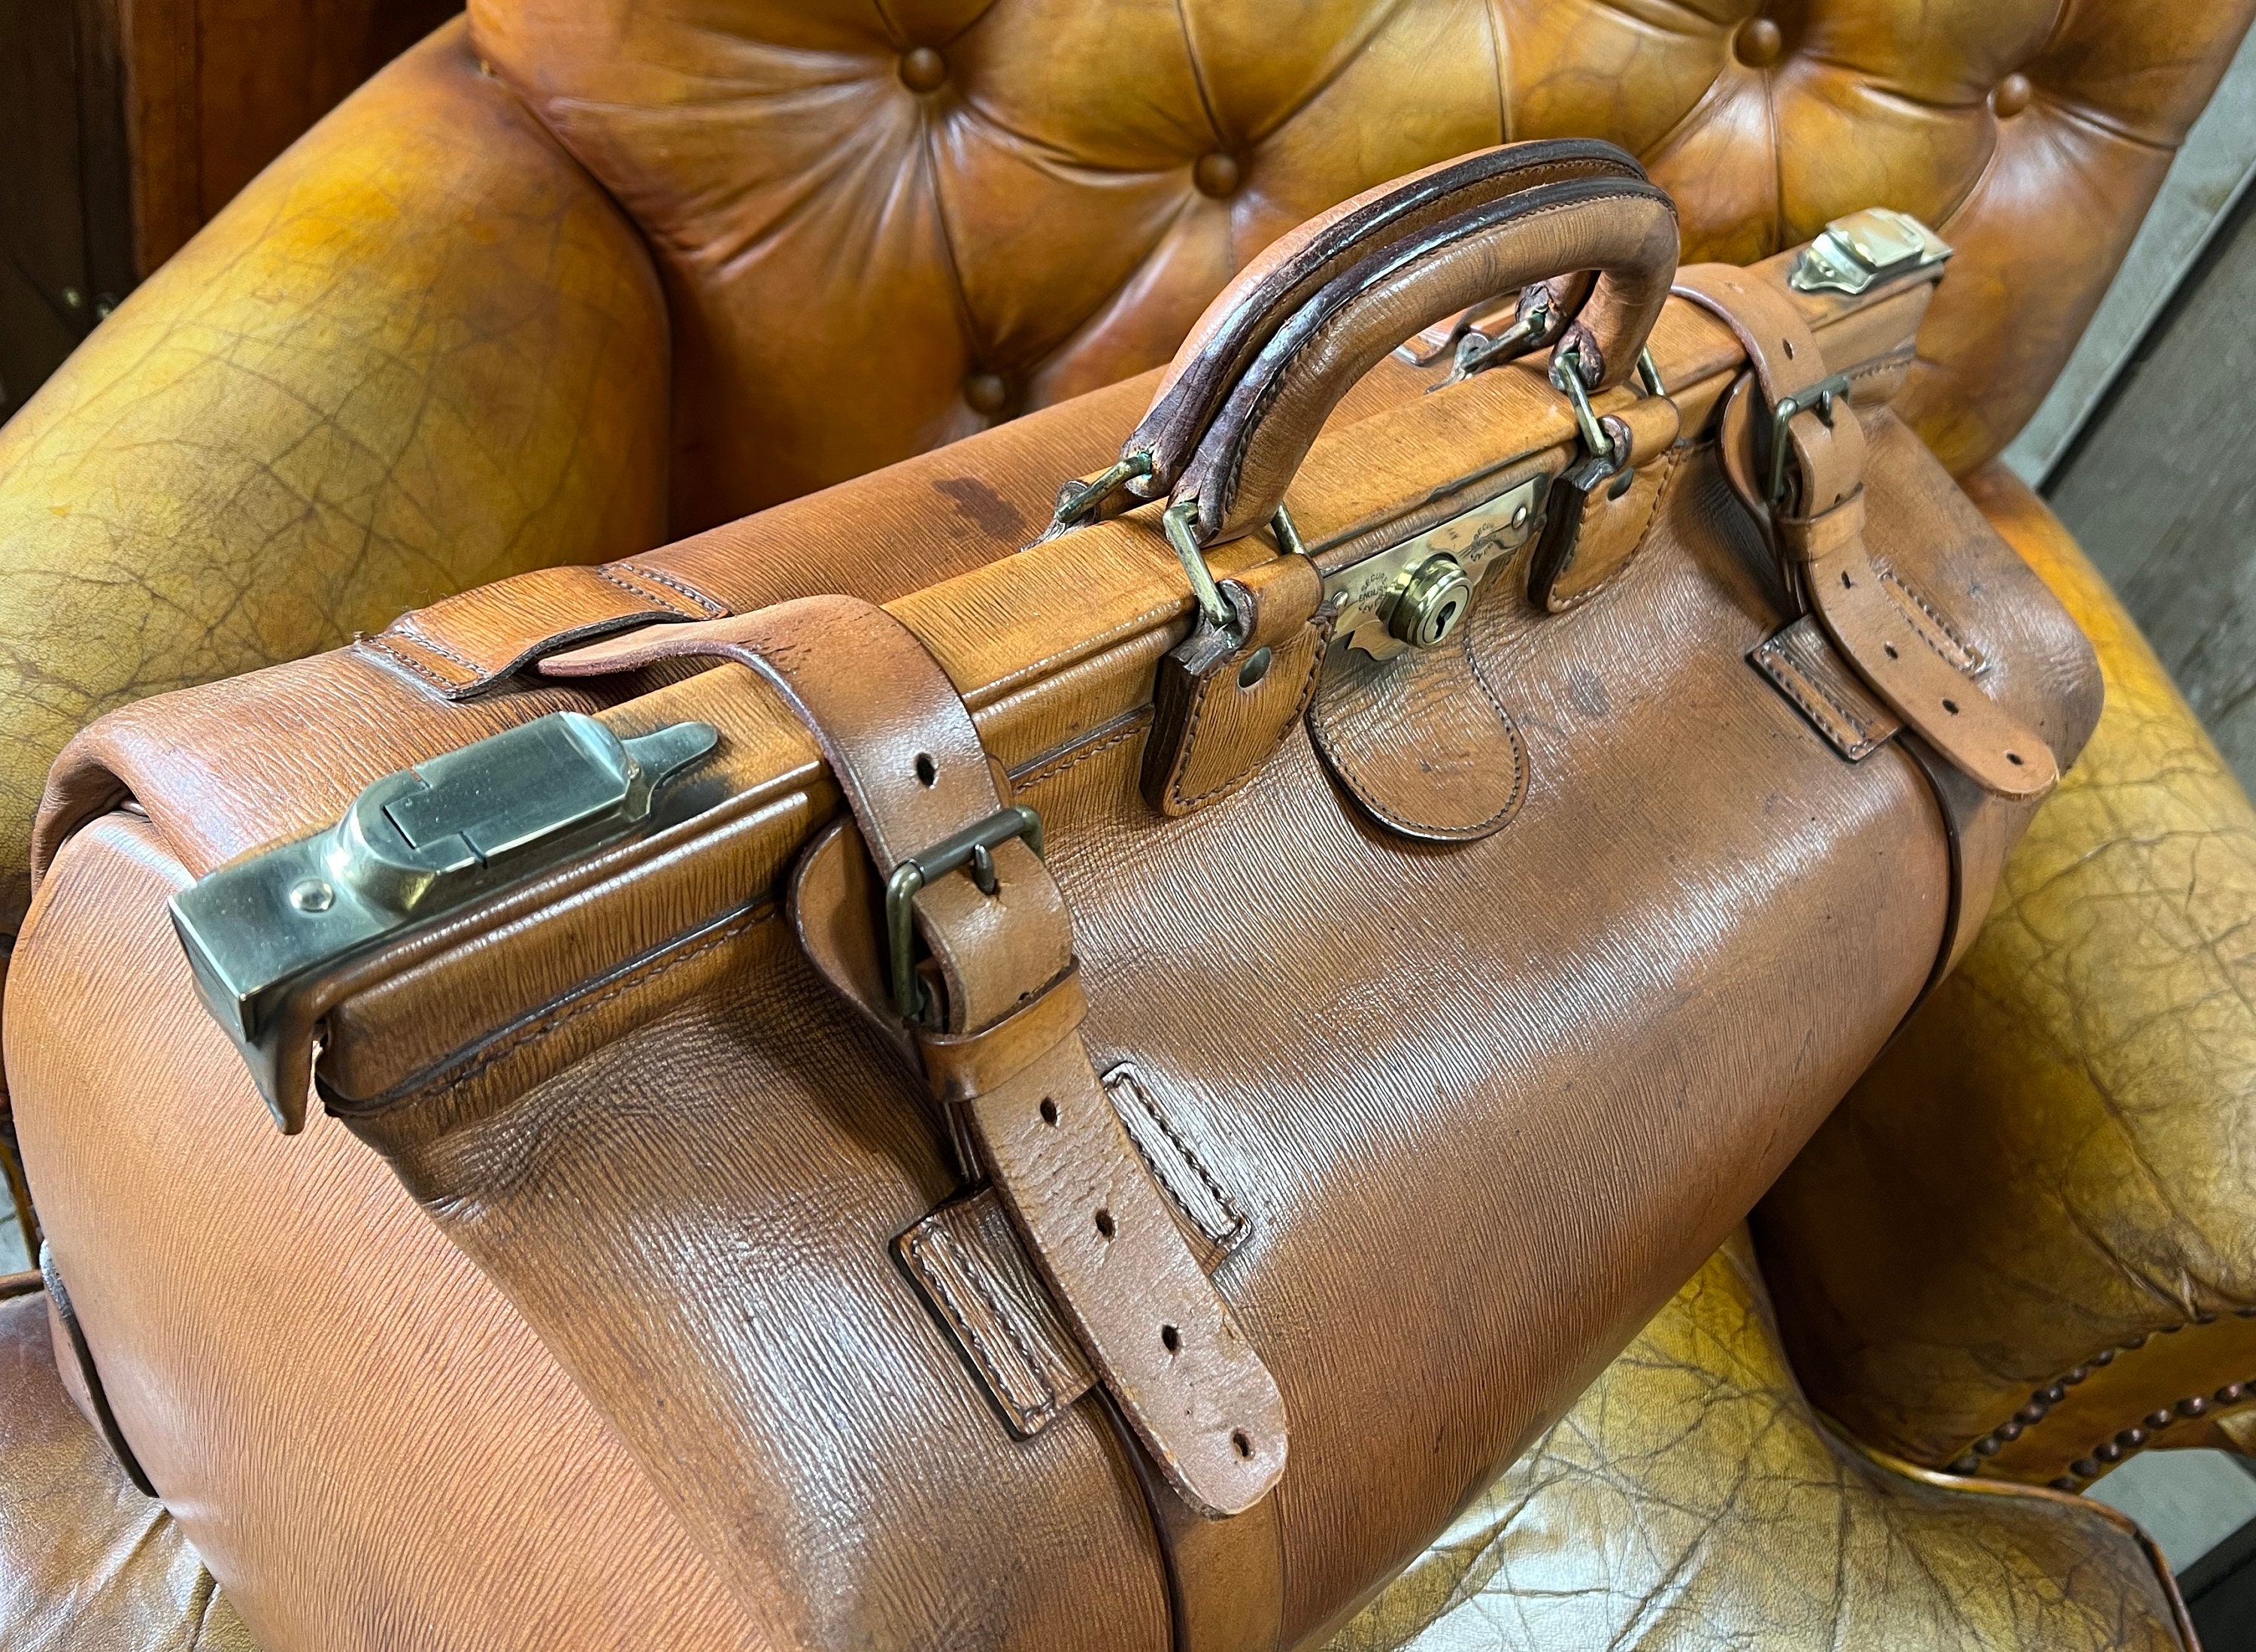 Luxury bridle leather Gladstone bag / travel bag hand stitched leather with  shoulder strap duffel bag